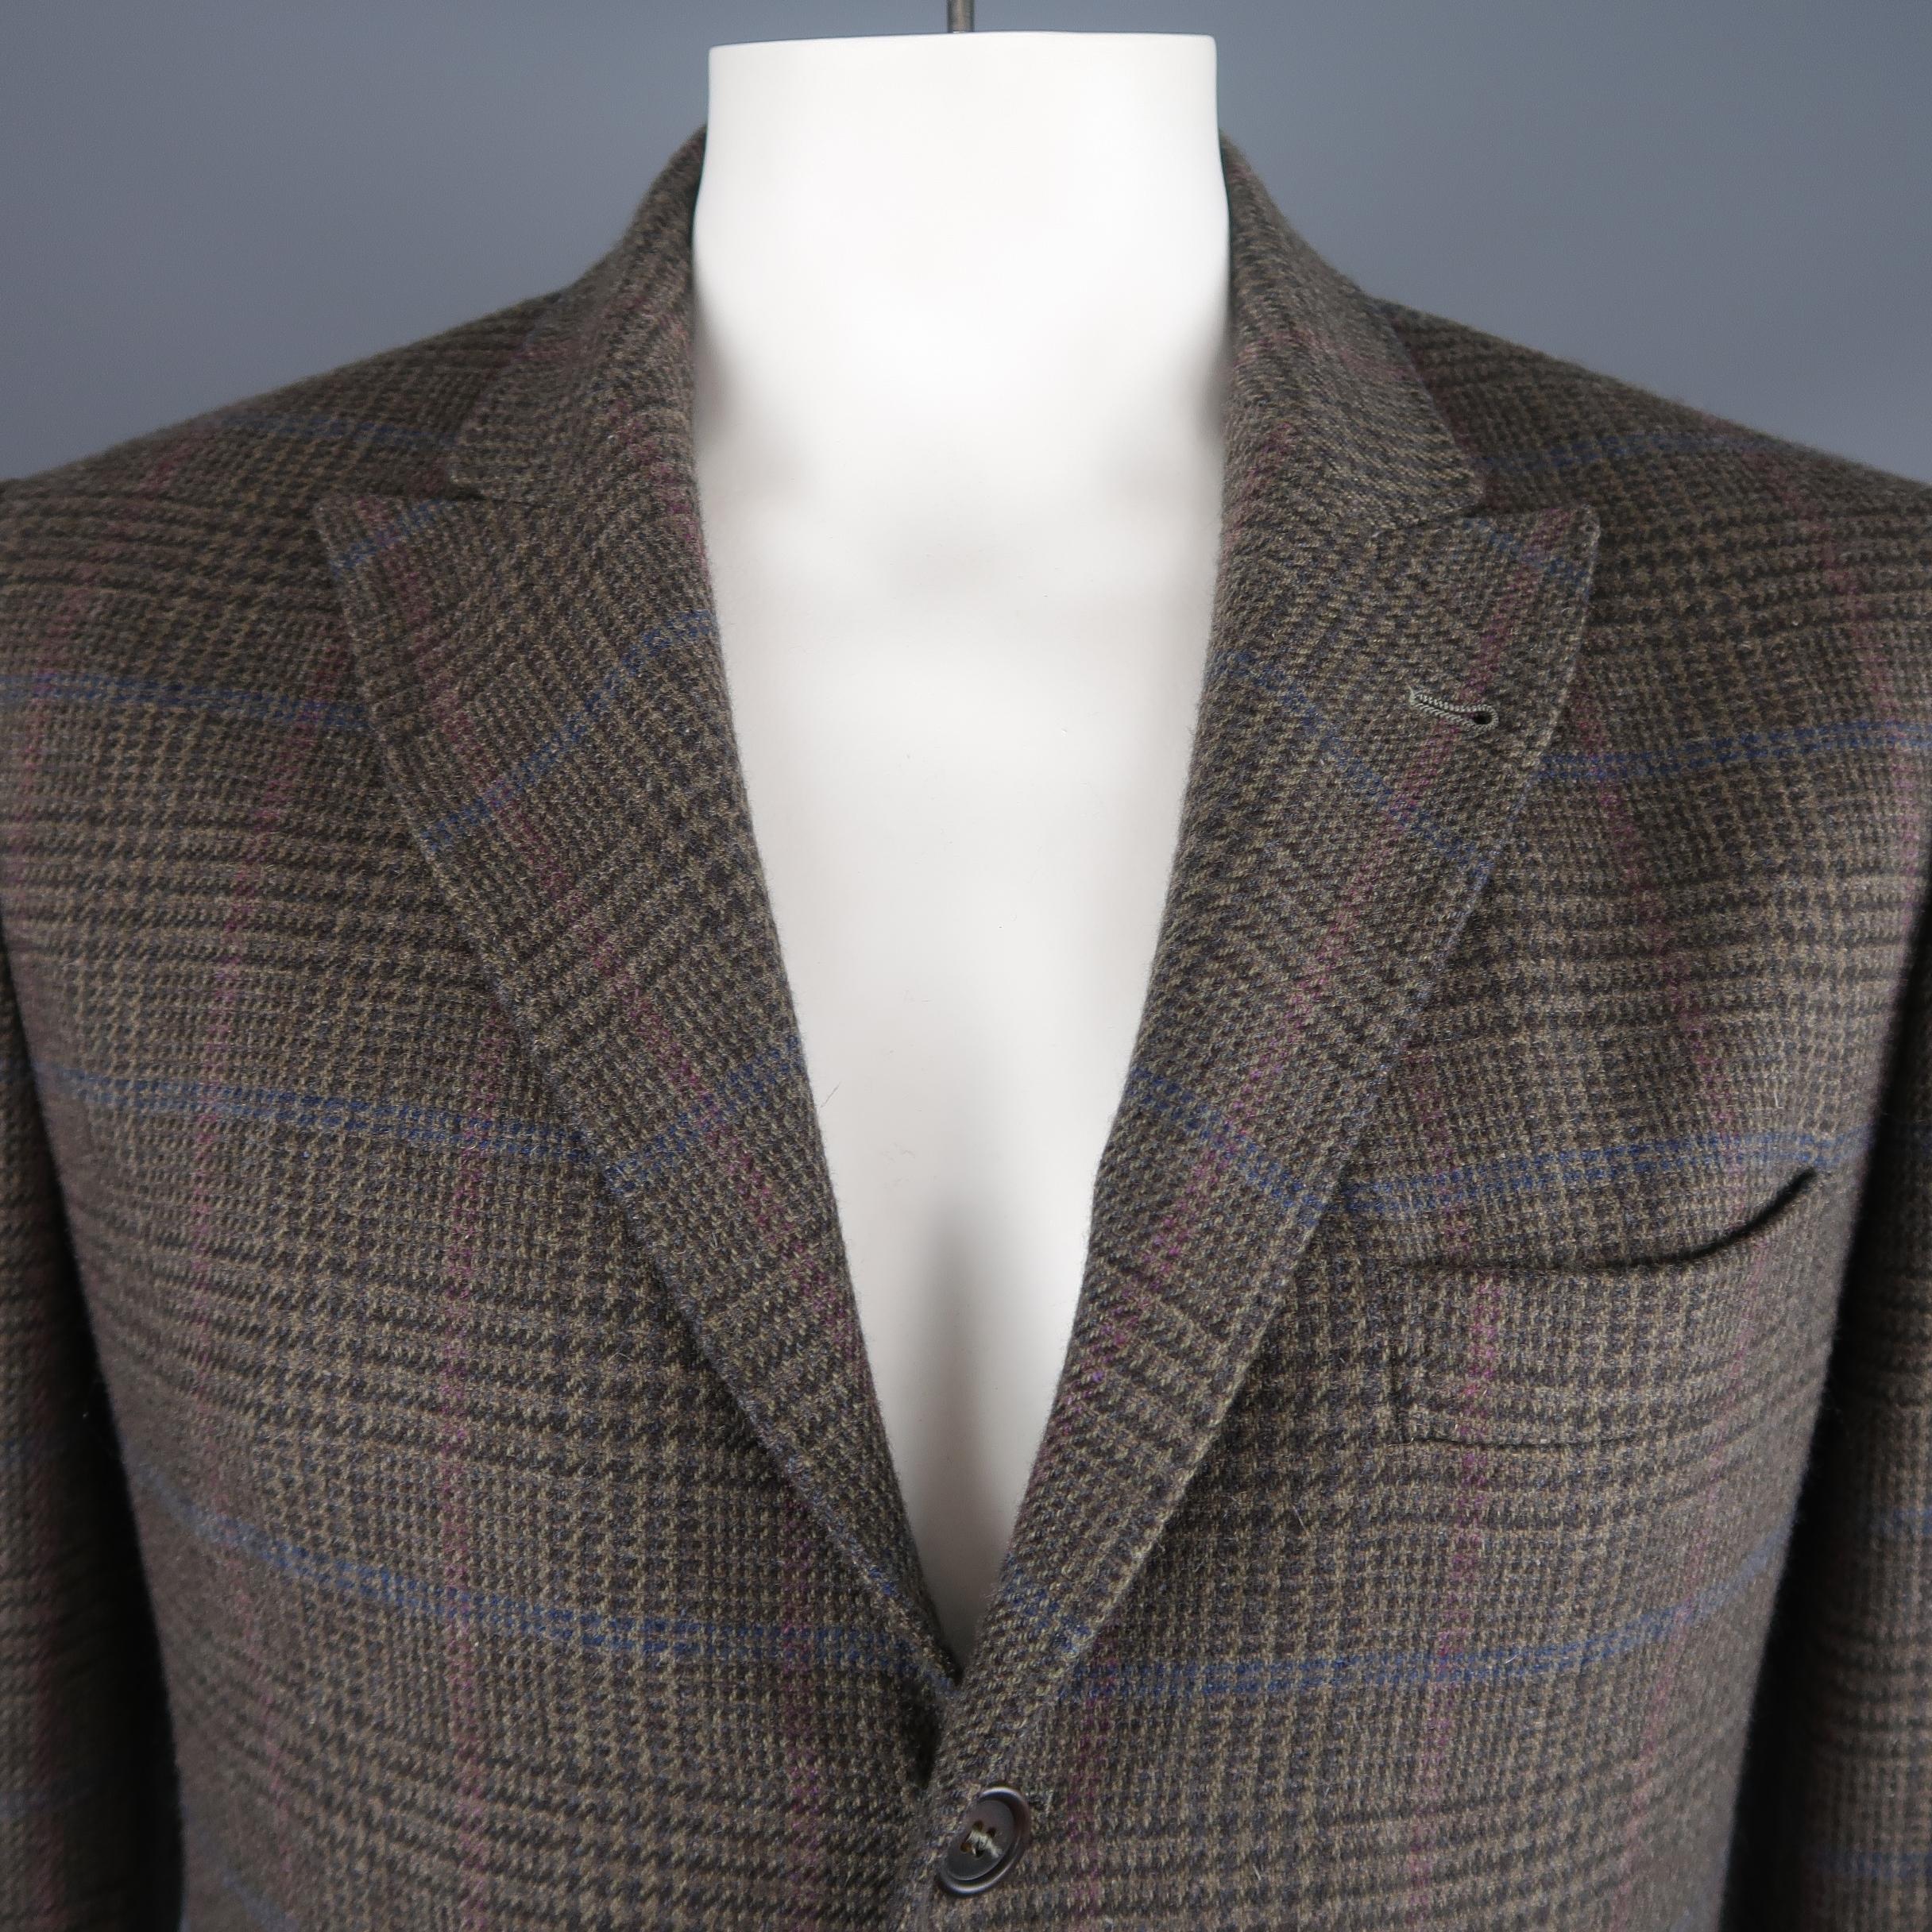 Single breasted Brunello Cucinelli sport jacket comes in taupe glenplaid cashmere with purple and blue stripes throughout, three button front, peak lapel, and double vented back. Made in Italy.
 
Excellent Pre-Owned Condition.
Marked: IT 52
